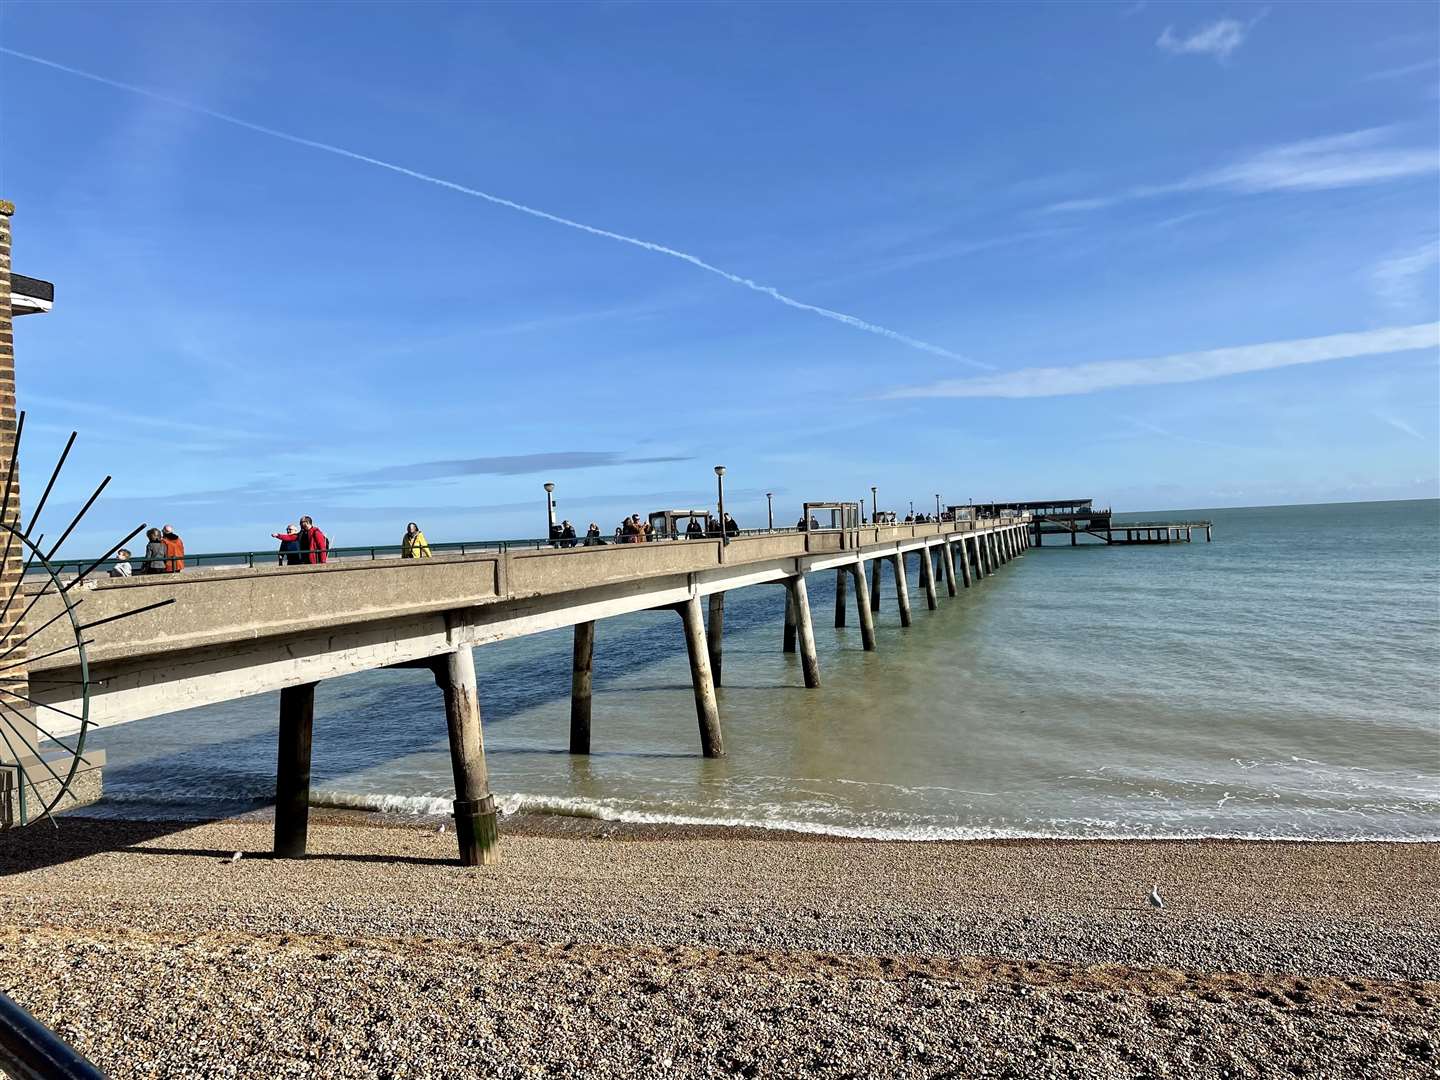 The baton will arrive at Deal pier